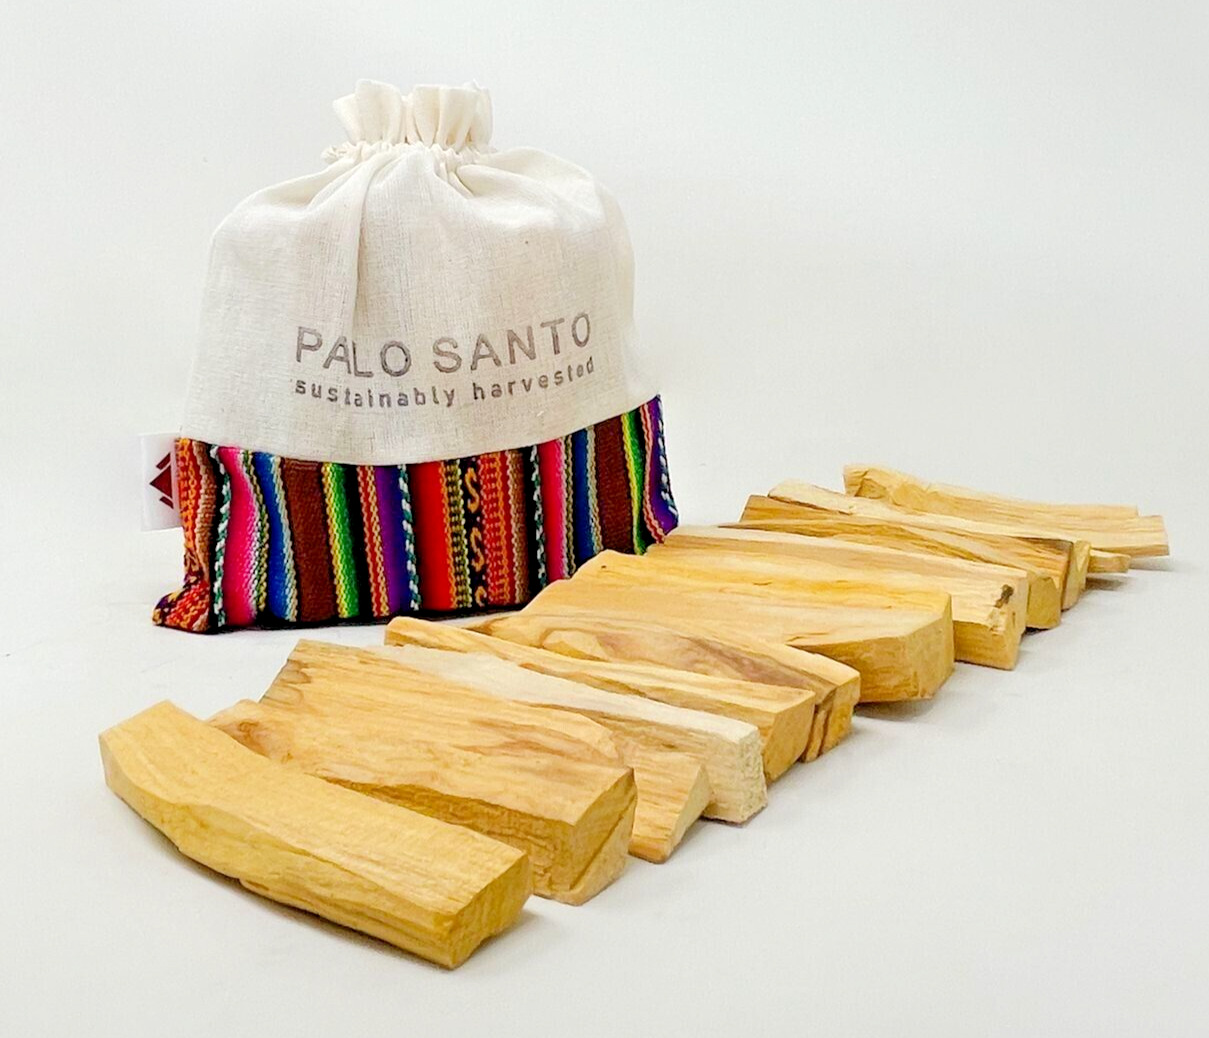 10  PALO SANTO-HOLLY WOOD STICKS FROM PERU  100% NATURAL with FREE REUSABLE BAG